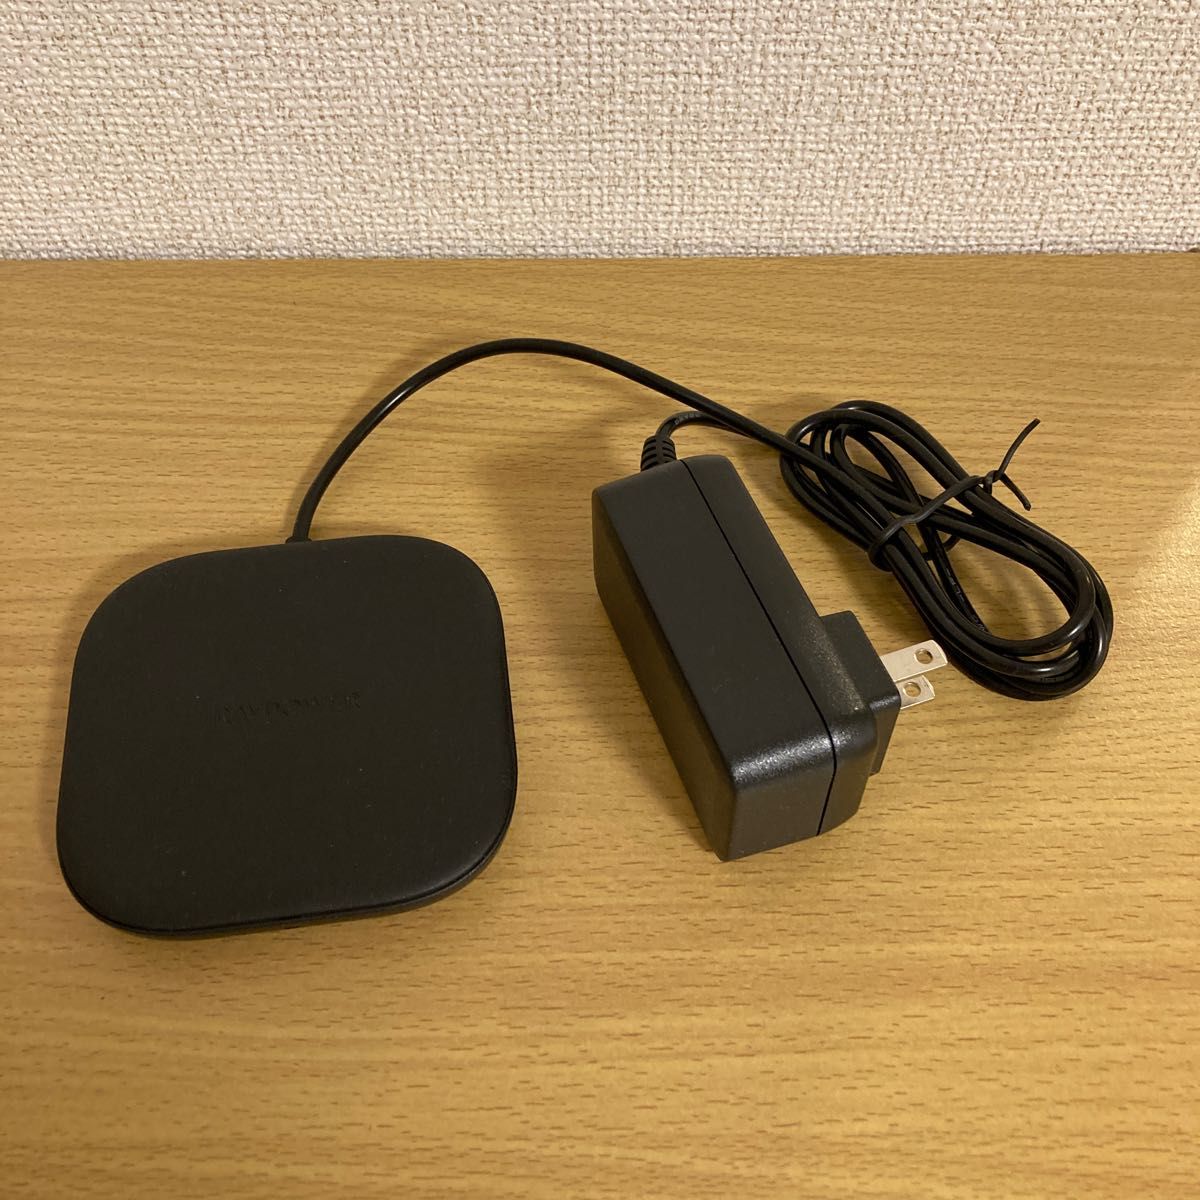 RAVPOWER Turbo 10W Wireless Charger ワイヤレス充電器 RP-WC006 ブラック SK